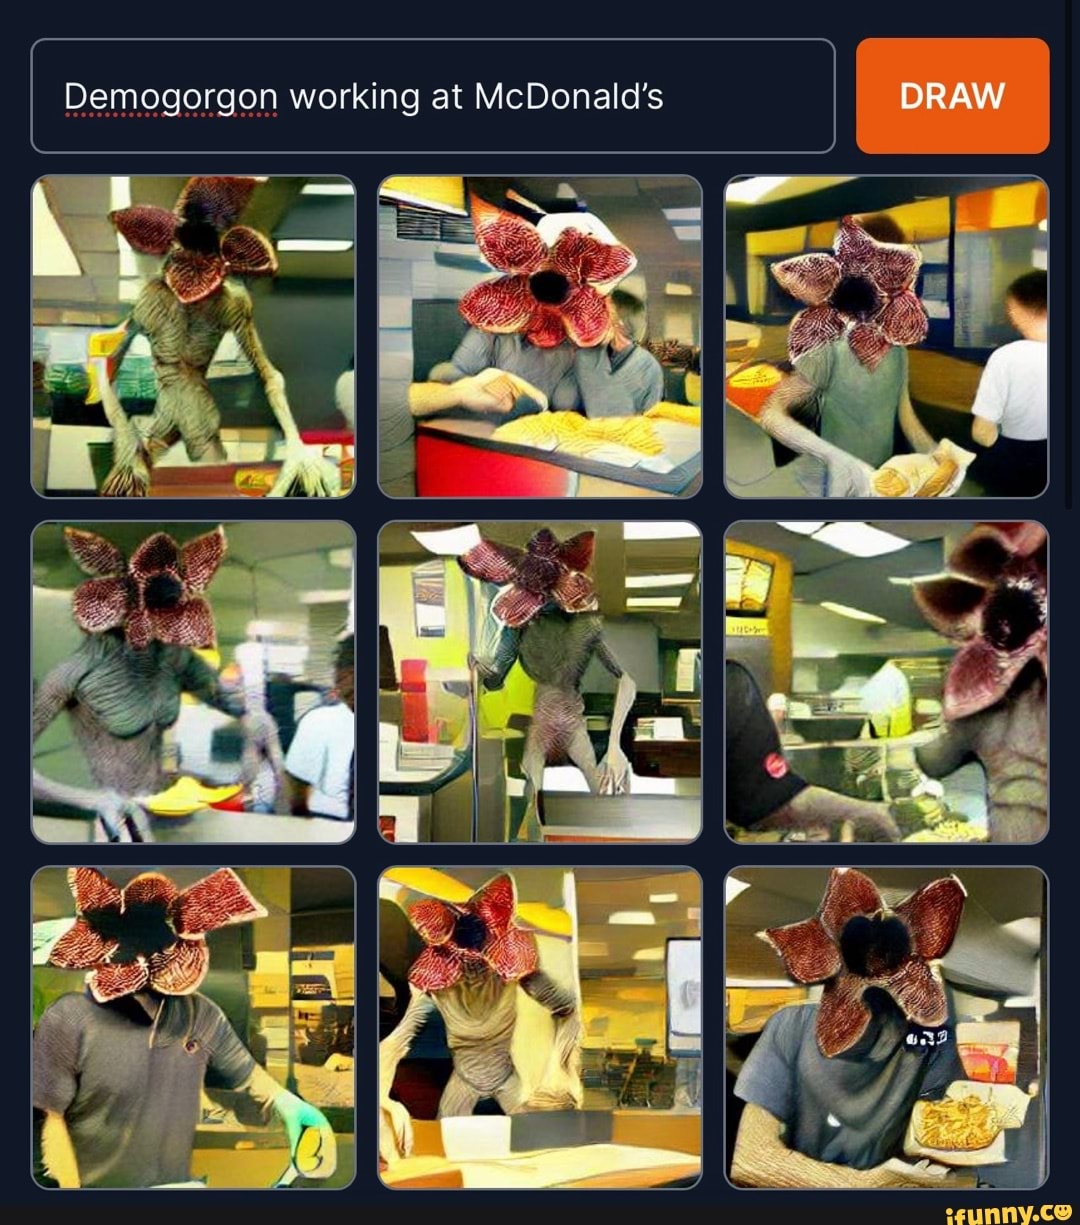 Al model generating images from any prompt! Run EDP445 eats a cupcake -  iFunny Brazil